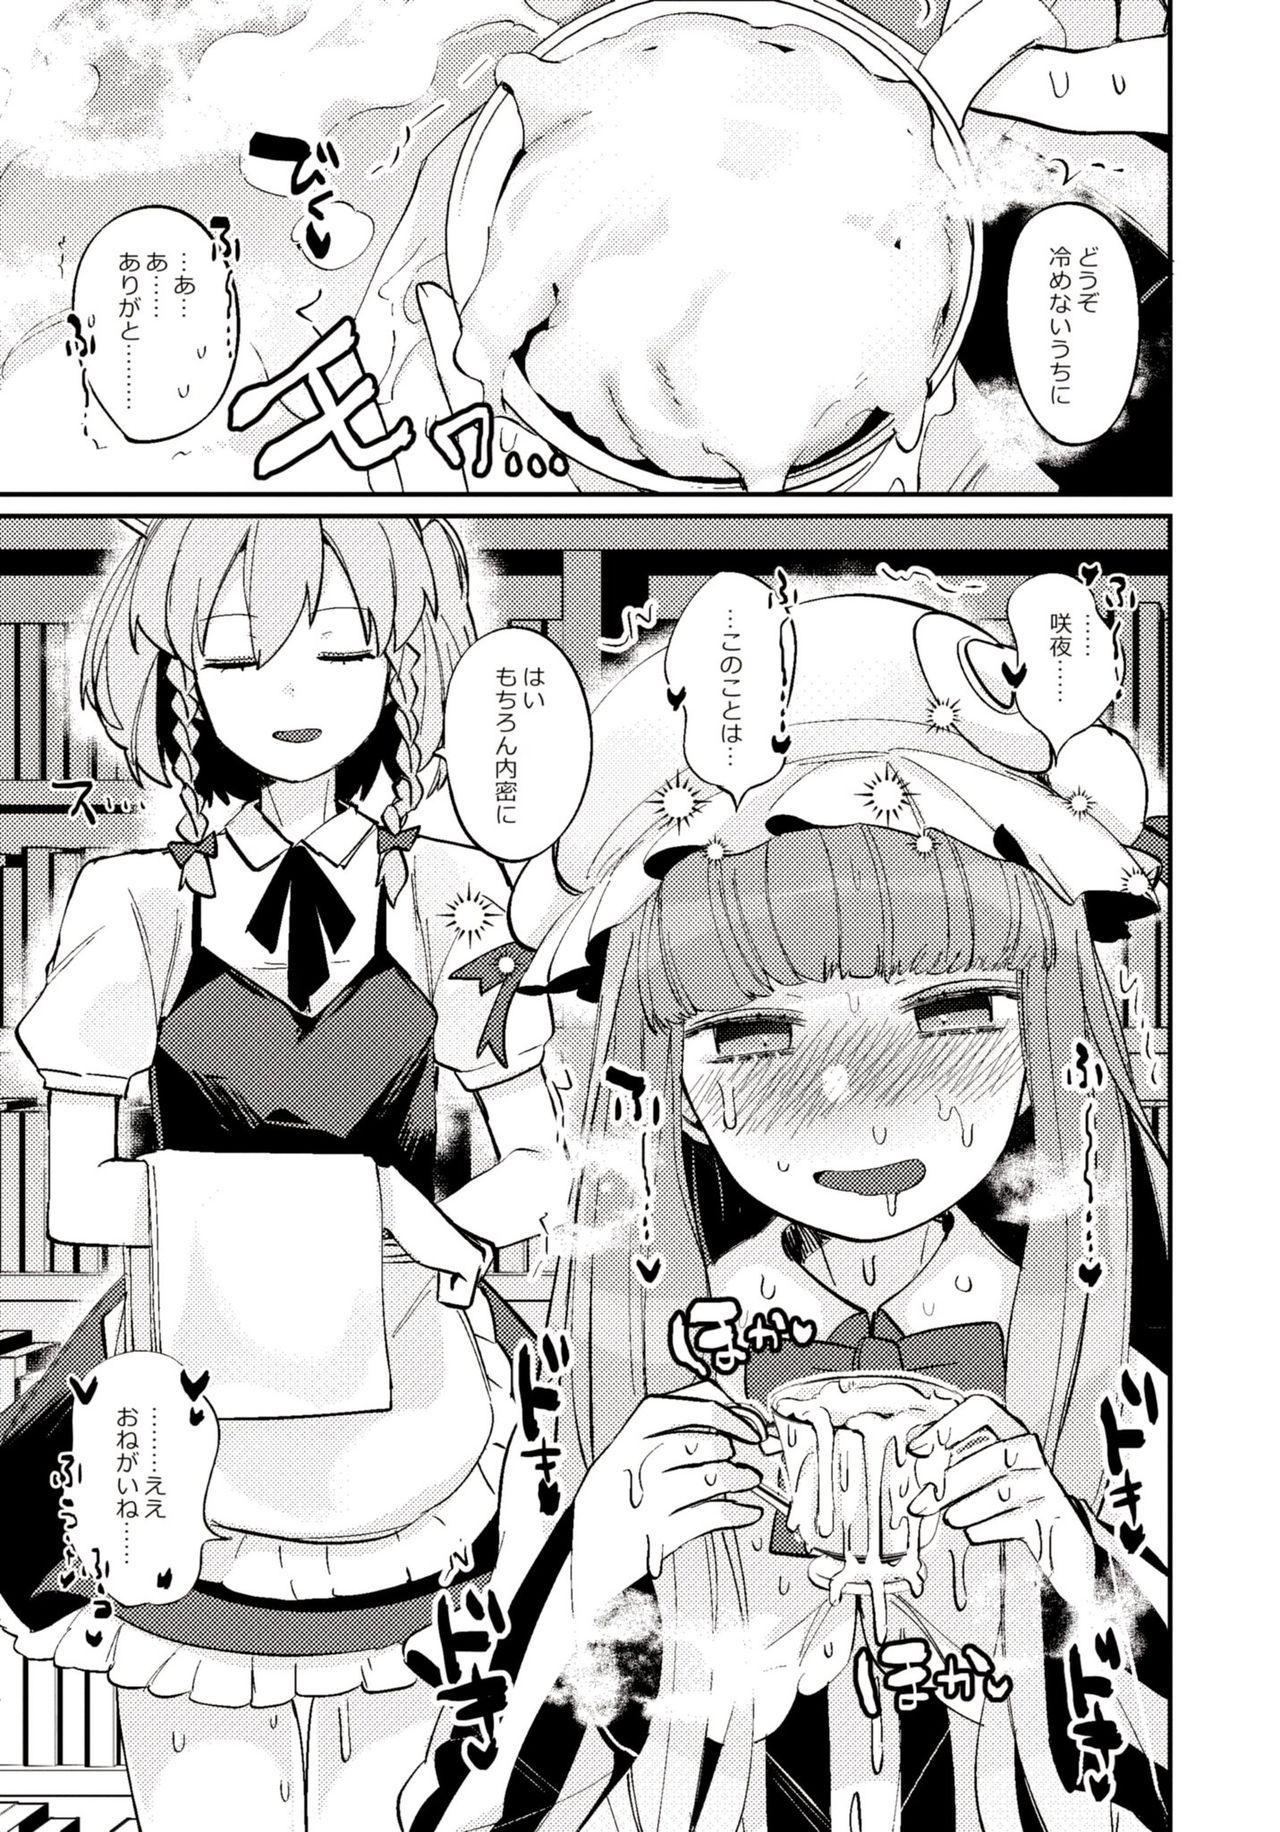 From メス男子匕首さんと書籍くんです！ - Touhou project Amateur Porno - Page 4